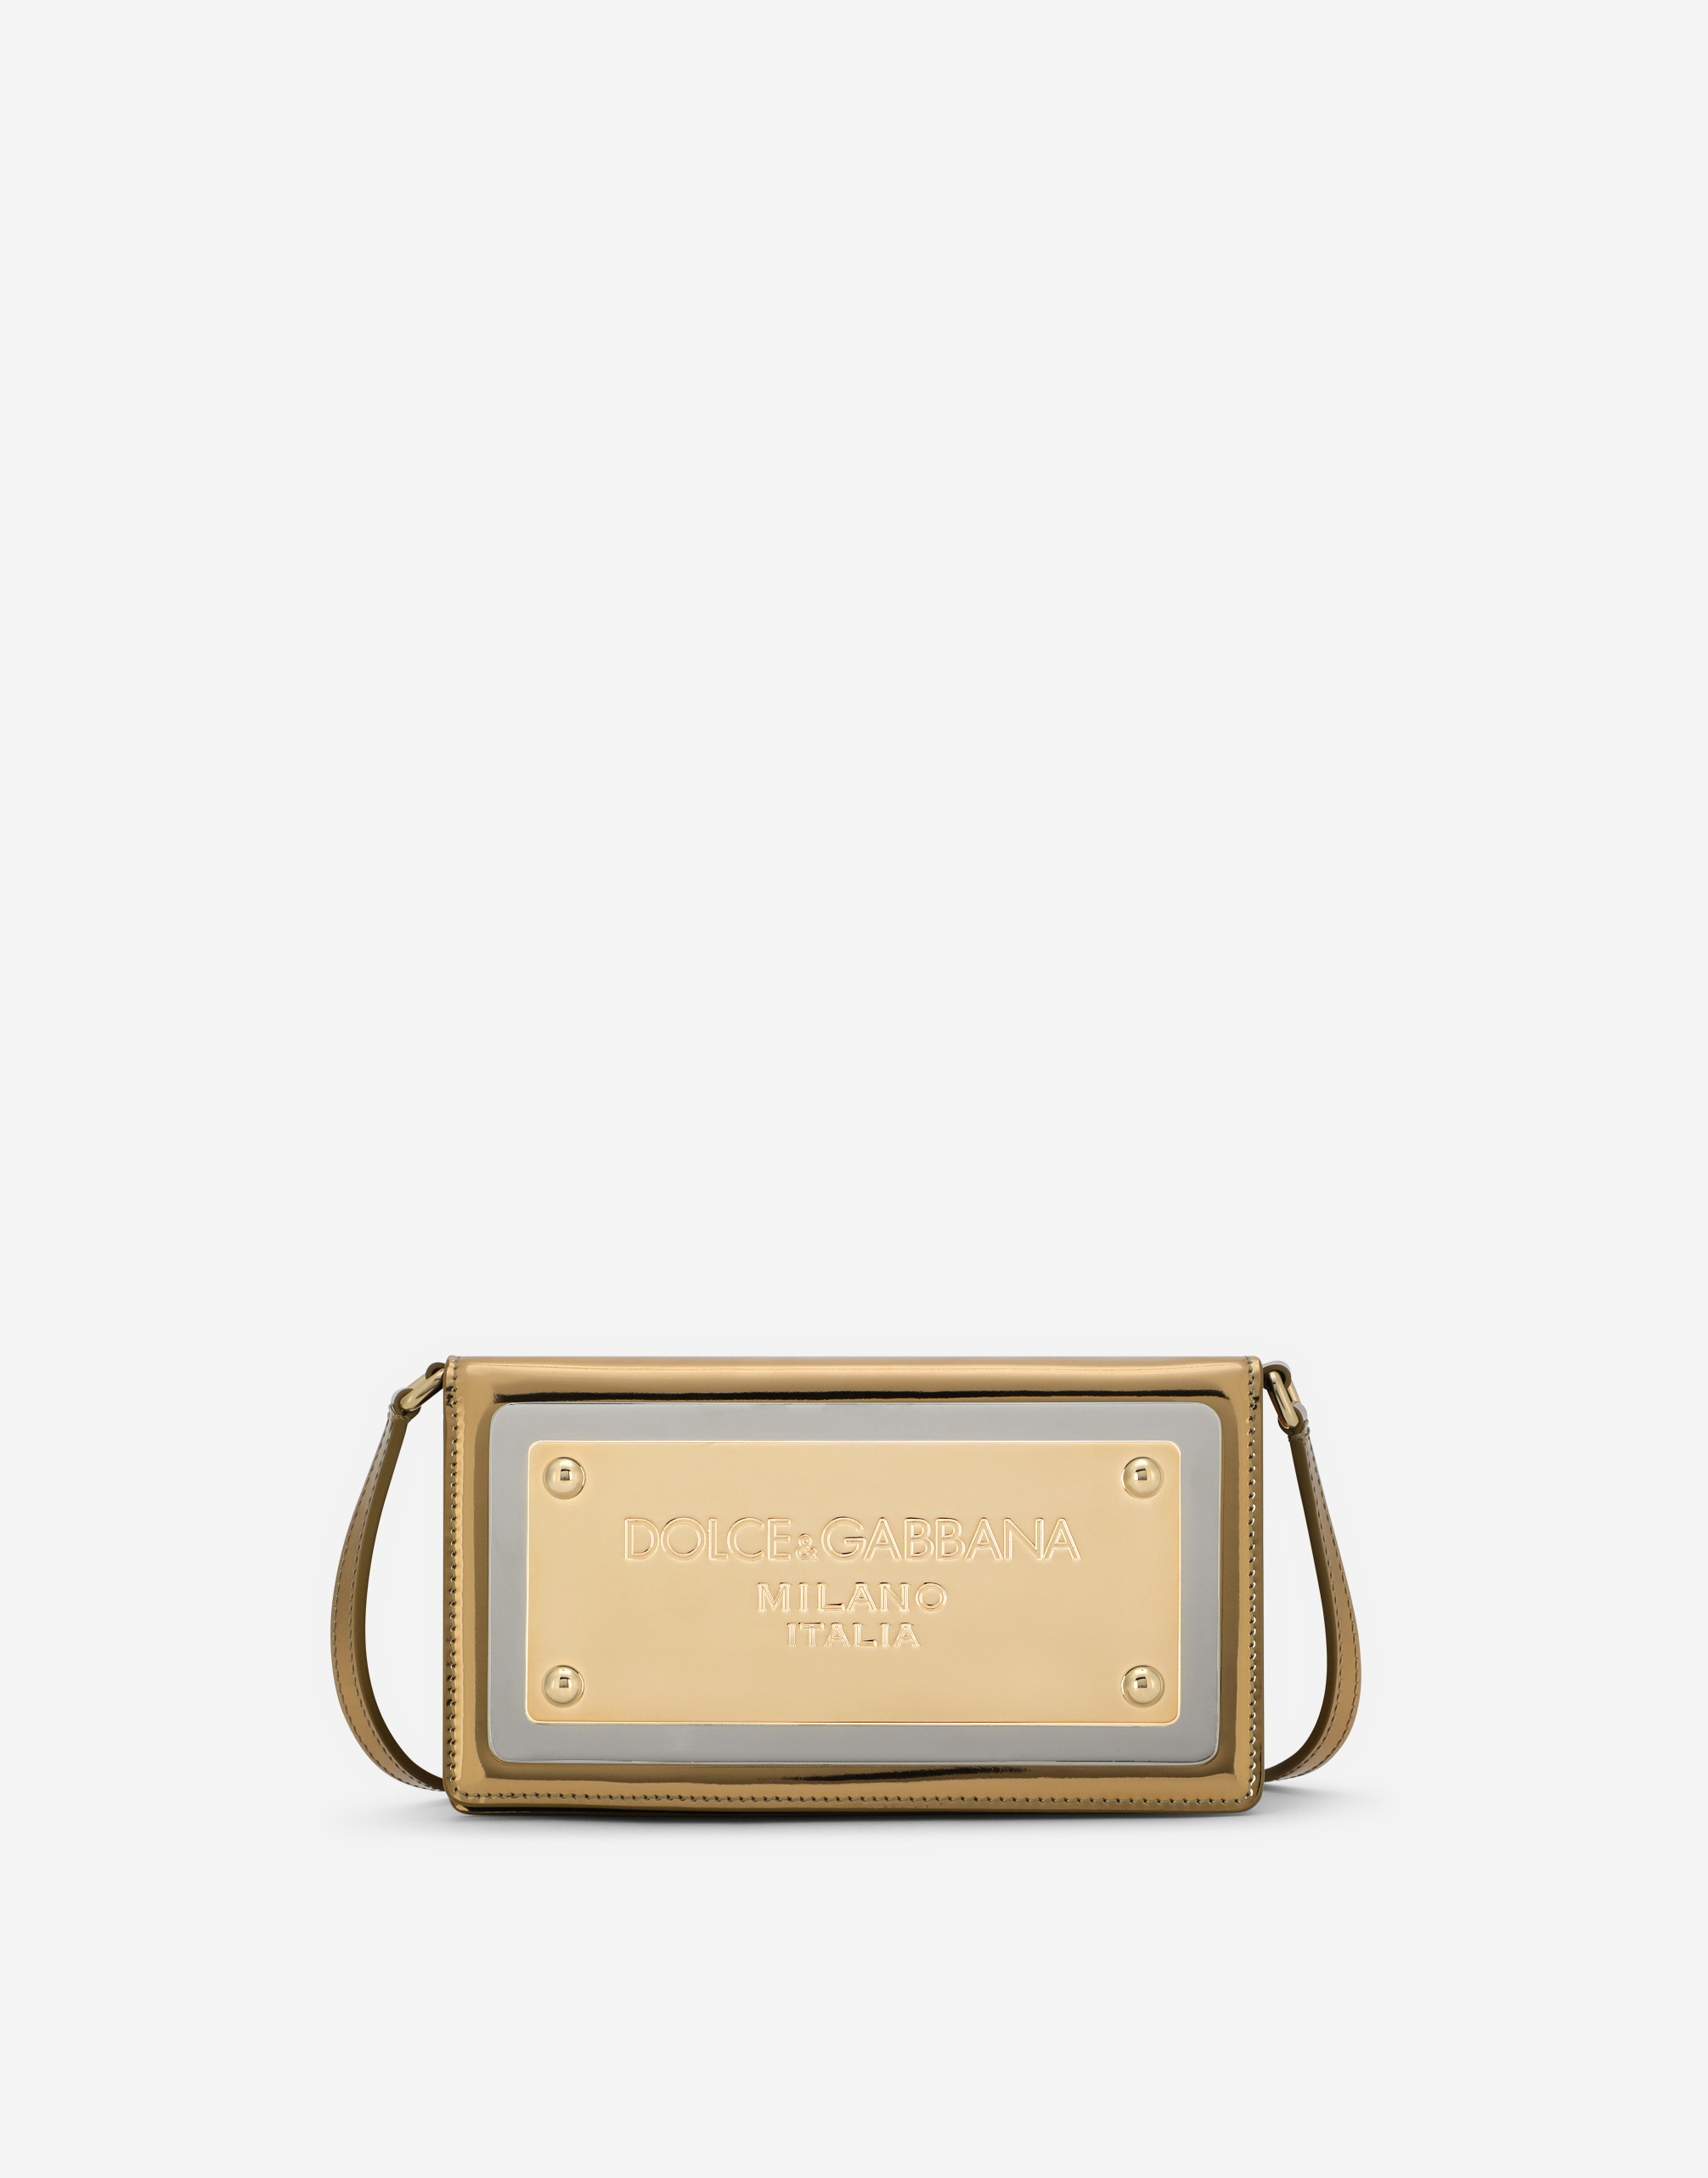 Phone bag with branded maxi-plate in Gold